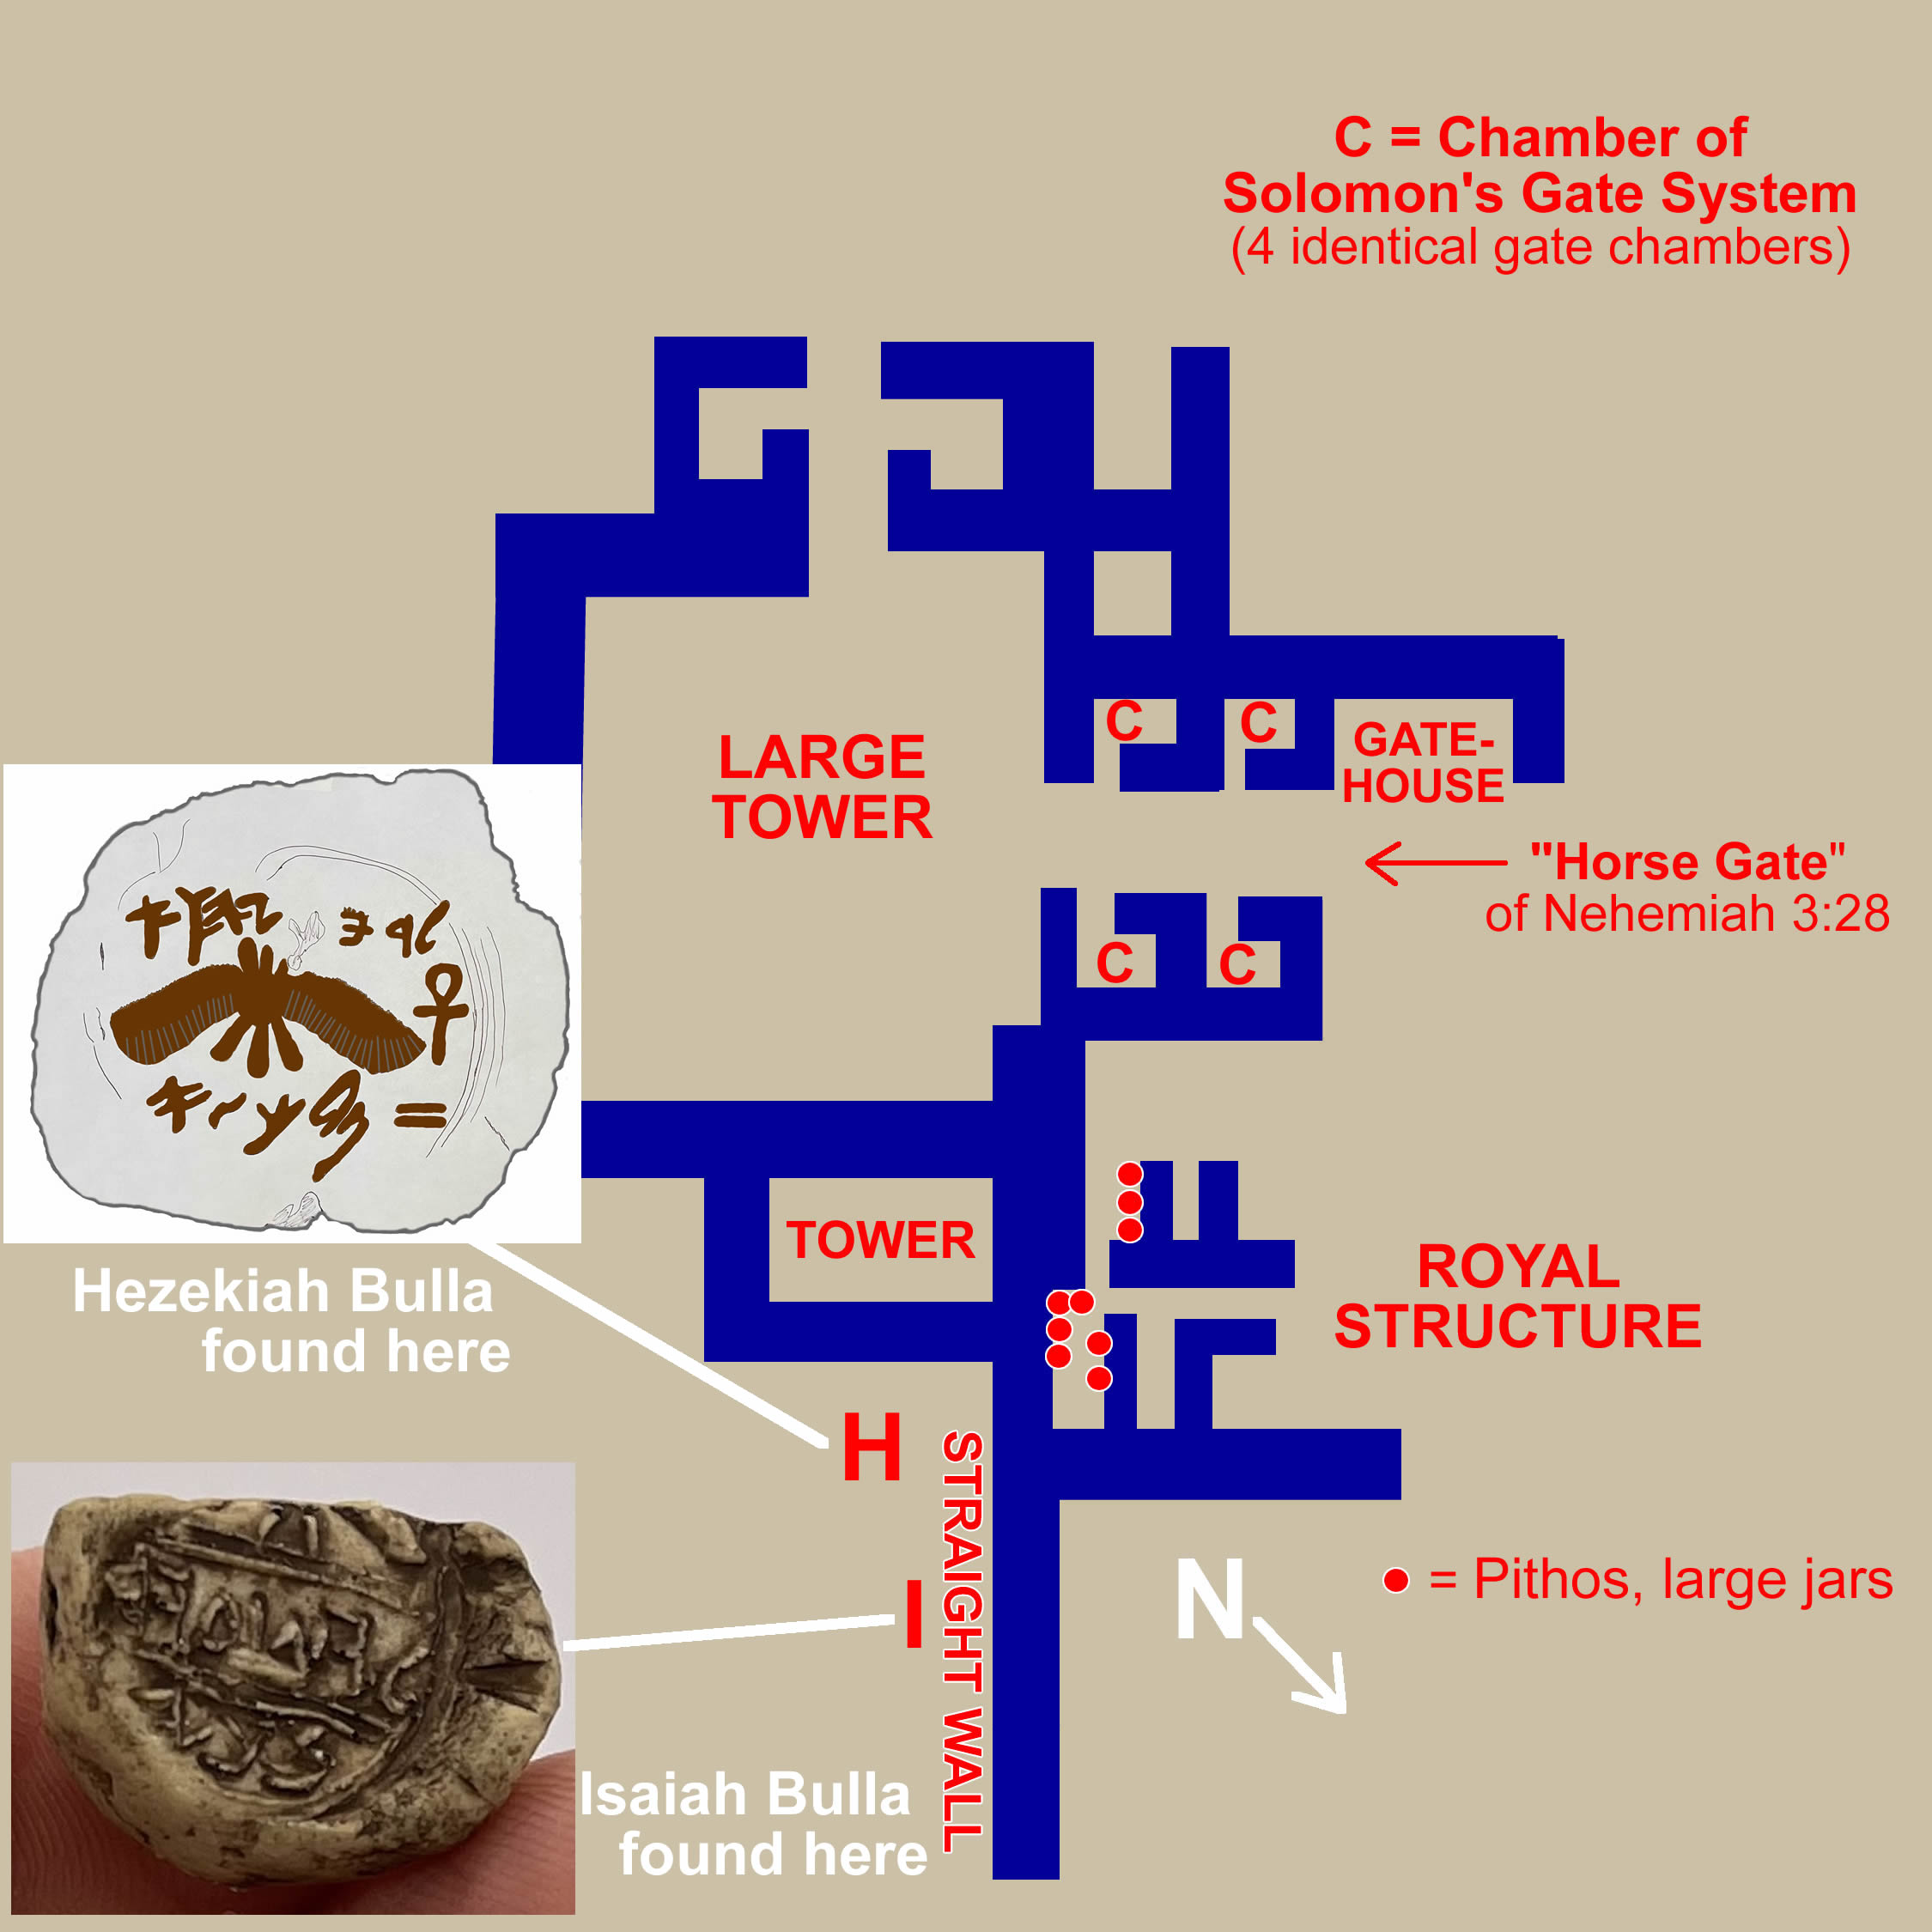 diagram showing location of finding the Hezekiah Bulla and Isaiah Bulla outside the Wall of Solomon and the Extra Tower in the 950 Gate System and Royal Storehouse on the Ophel, Straight Wall